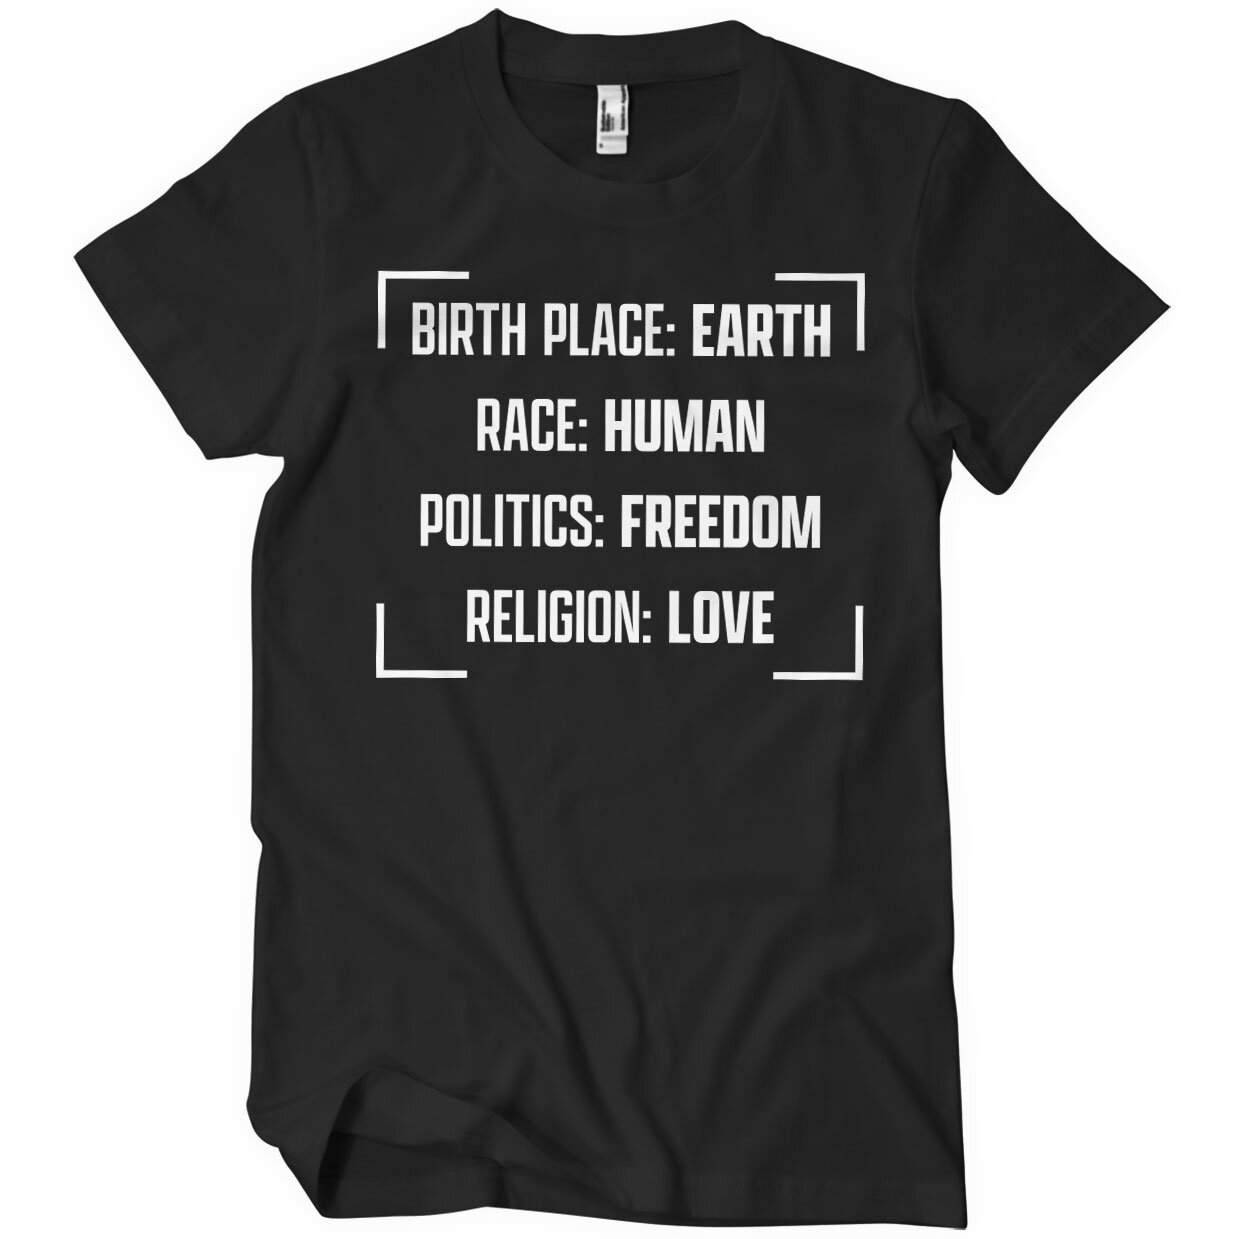 Birthplace - Earth T-Shirt